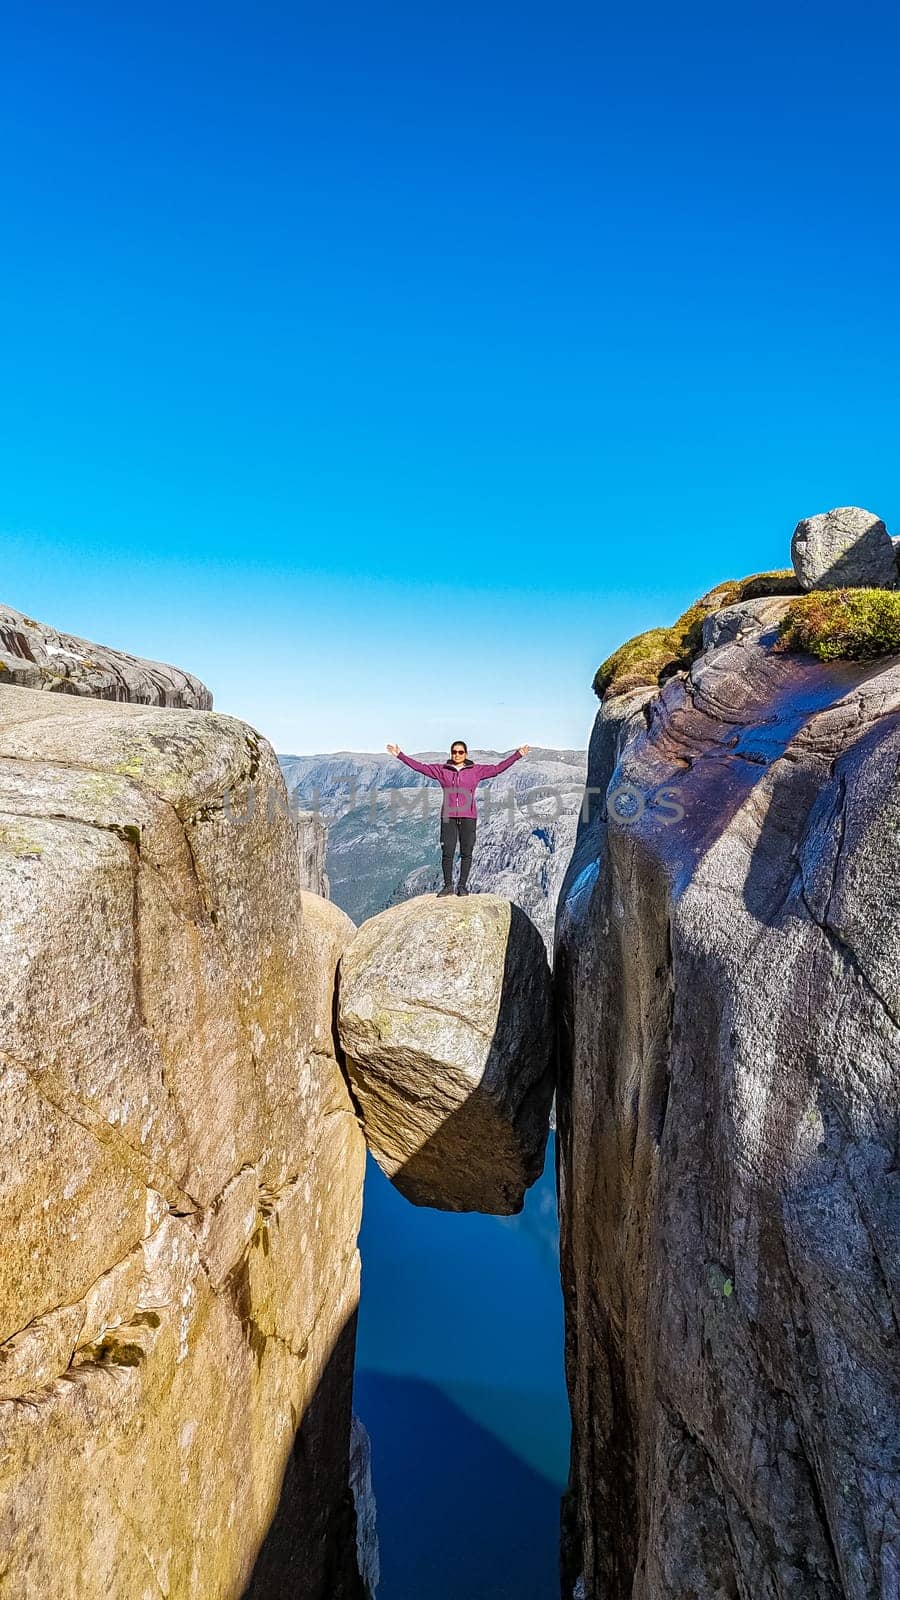 A person stands with arms outstretched on a rock formation at Kjeragbolten, Norway, on a clear day. Asian women with hands up at Kjeragbolten, Norway